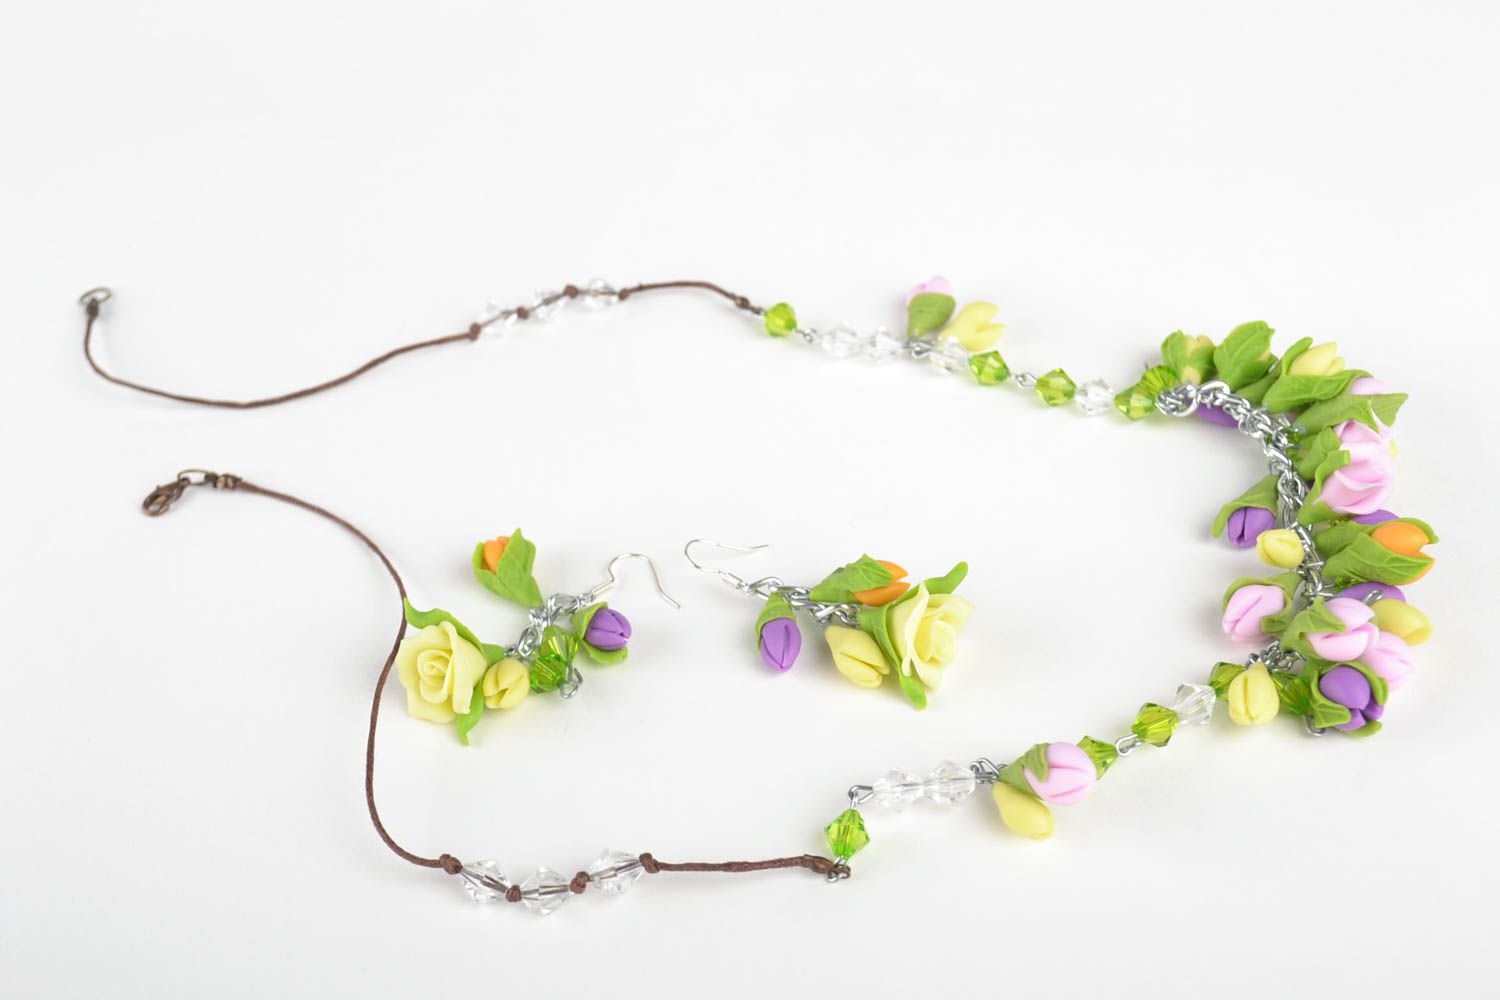 Handmade earrings and necklace with flowers designer floral bijouterie set photo 2